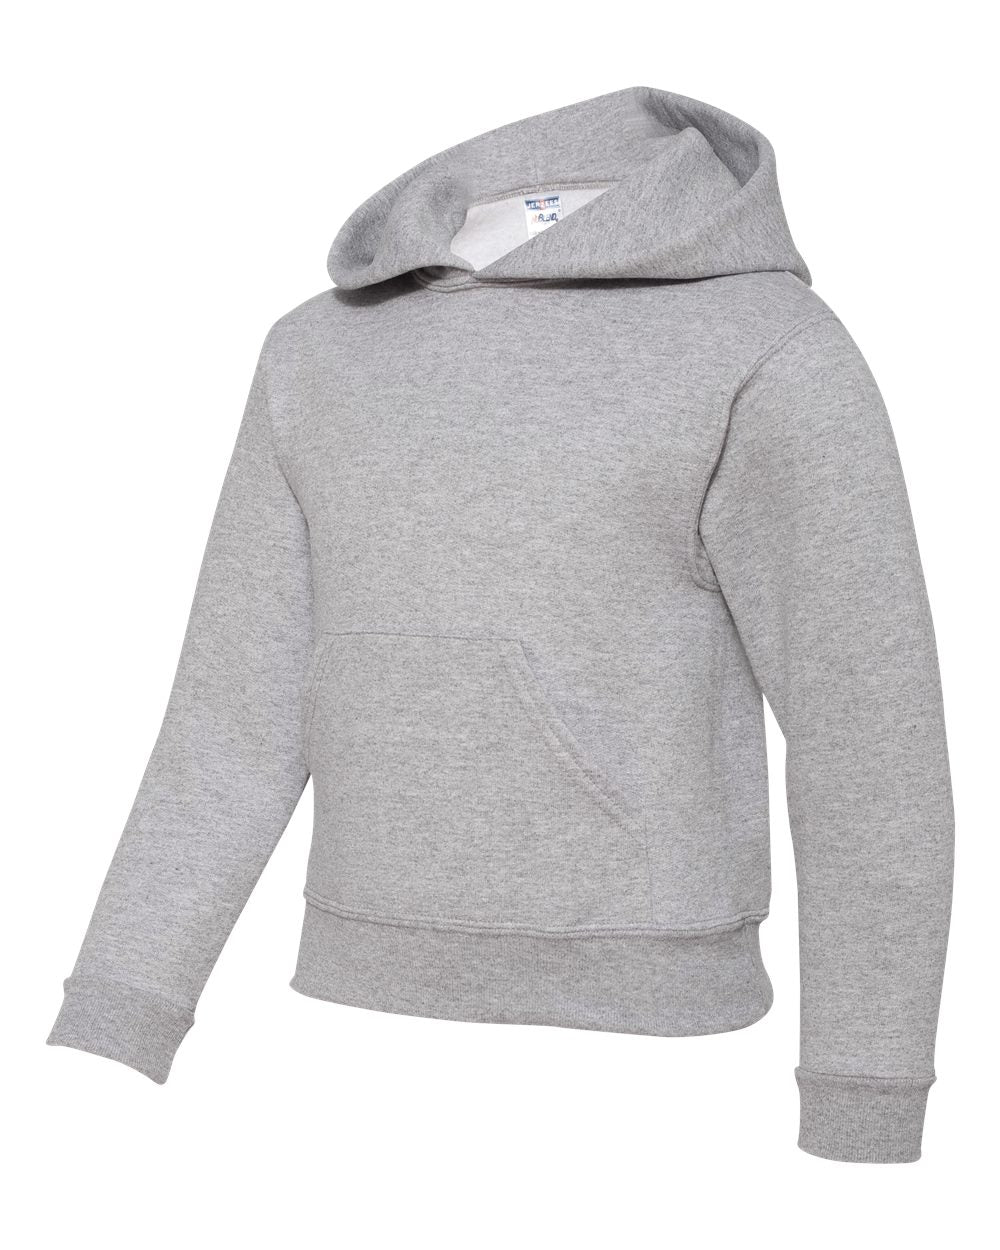 JERZEES NuBlend® Youth Hooded Sweatshirt 996YR #color_Athletic Heather